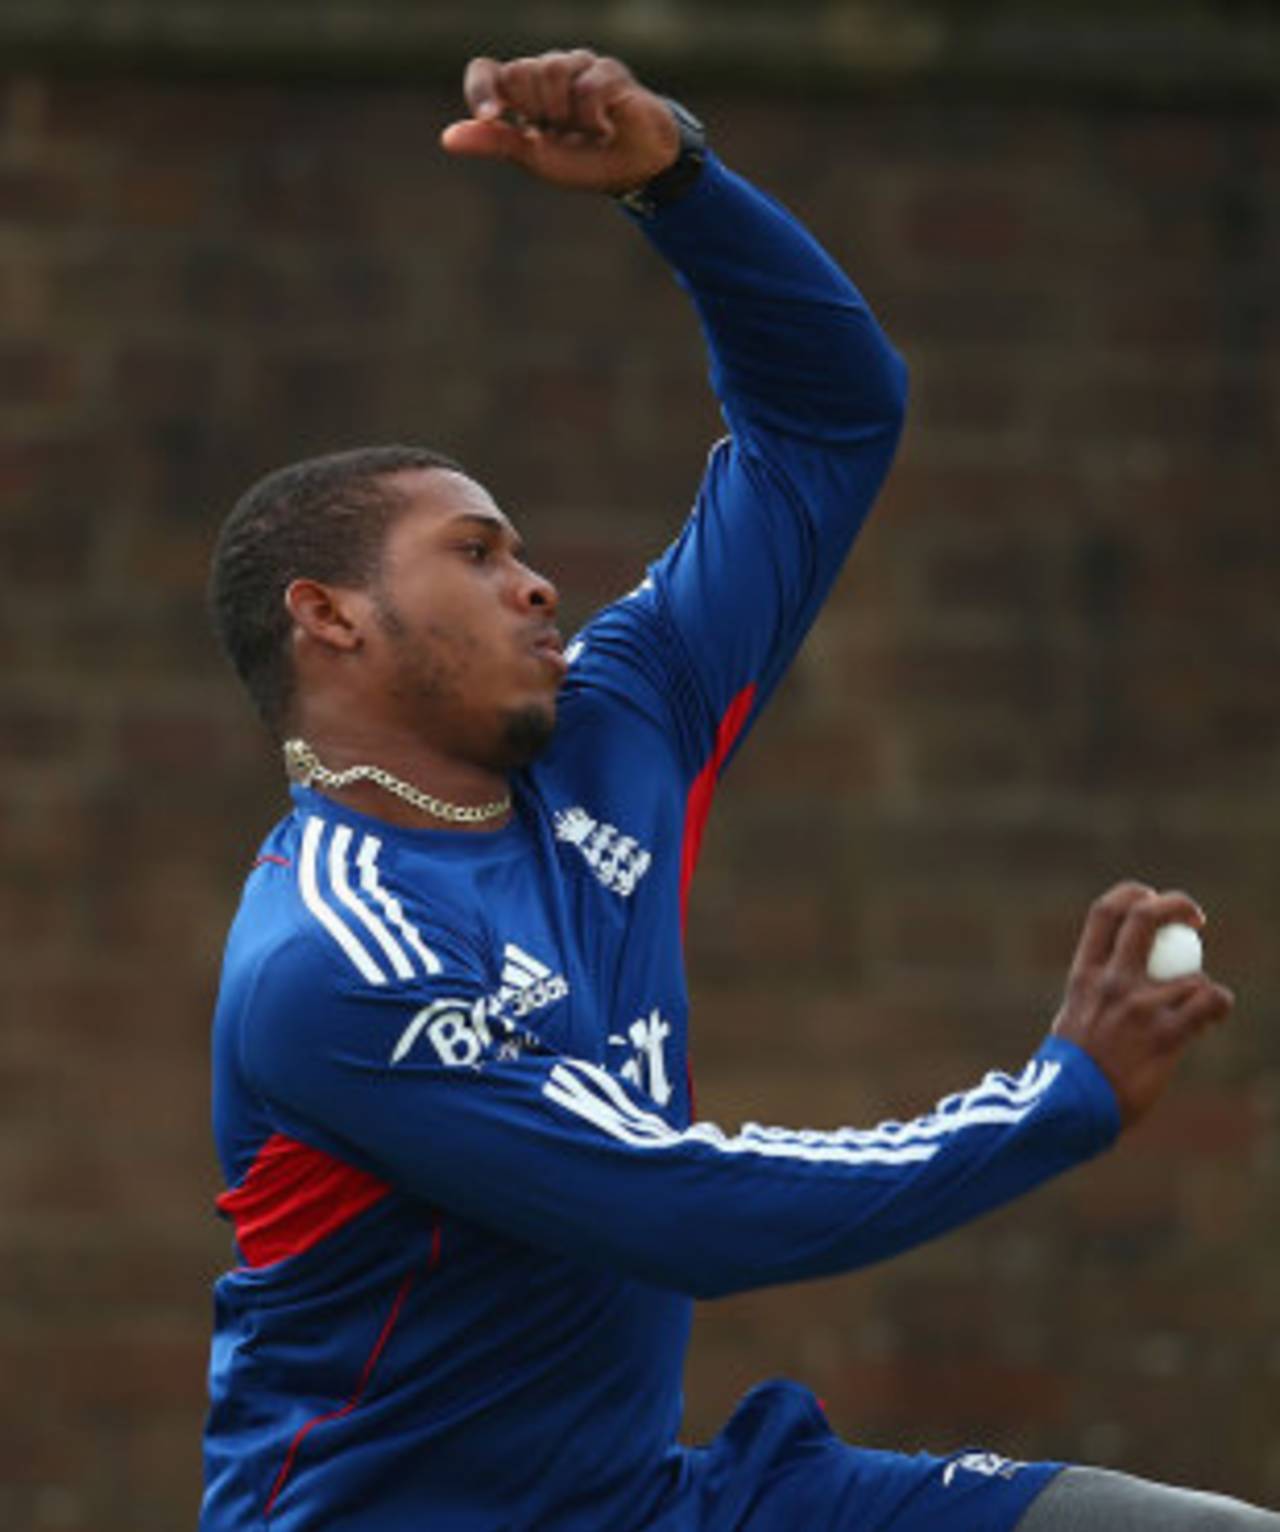 Chris Jordan is one of the other bowlers available should England want to make a change&nbsp;&nbsp;&bull;&nbsp;&nbsp;Getty Images